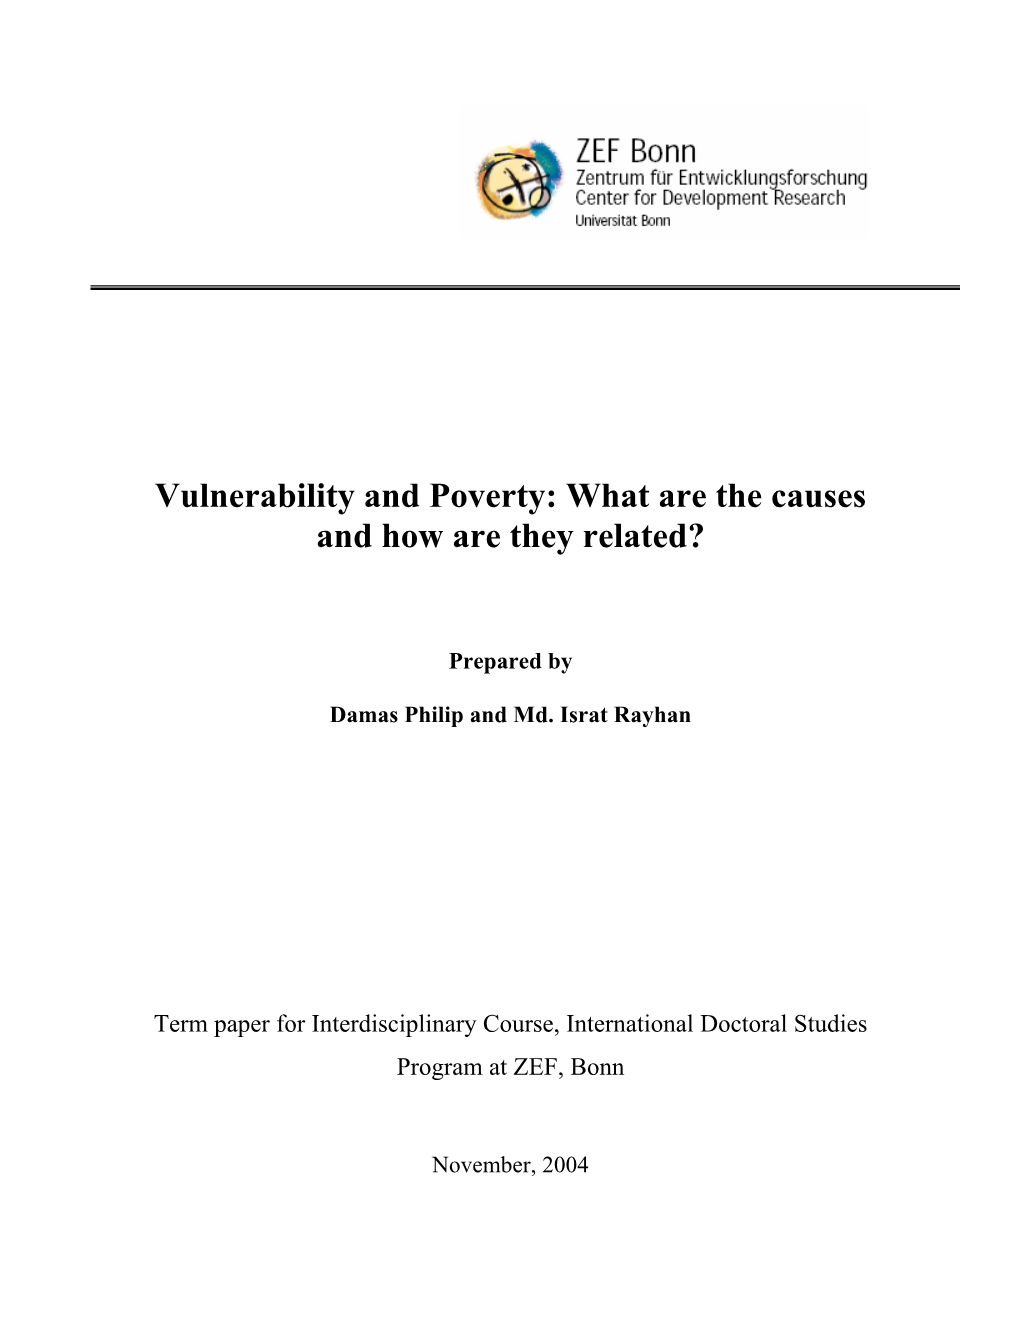 Vulnerability and Poverty: What Are the Causes and How Are They Related?